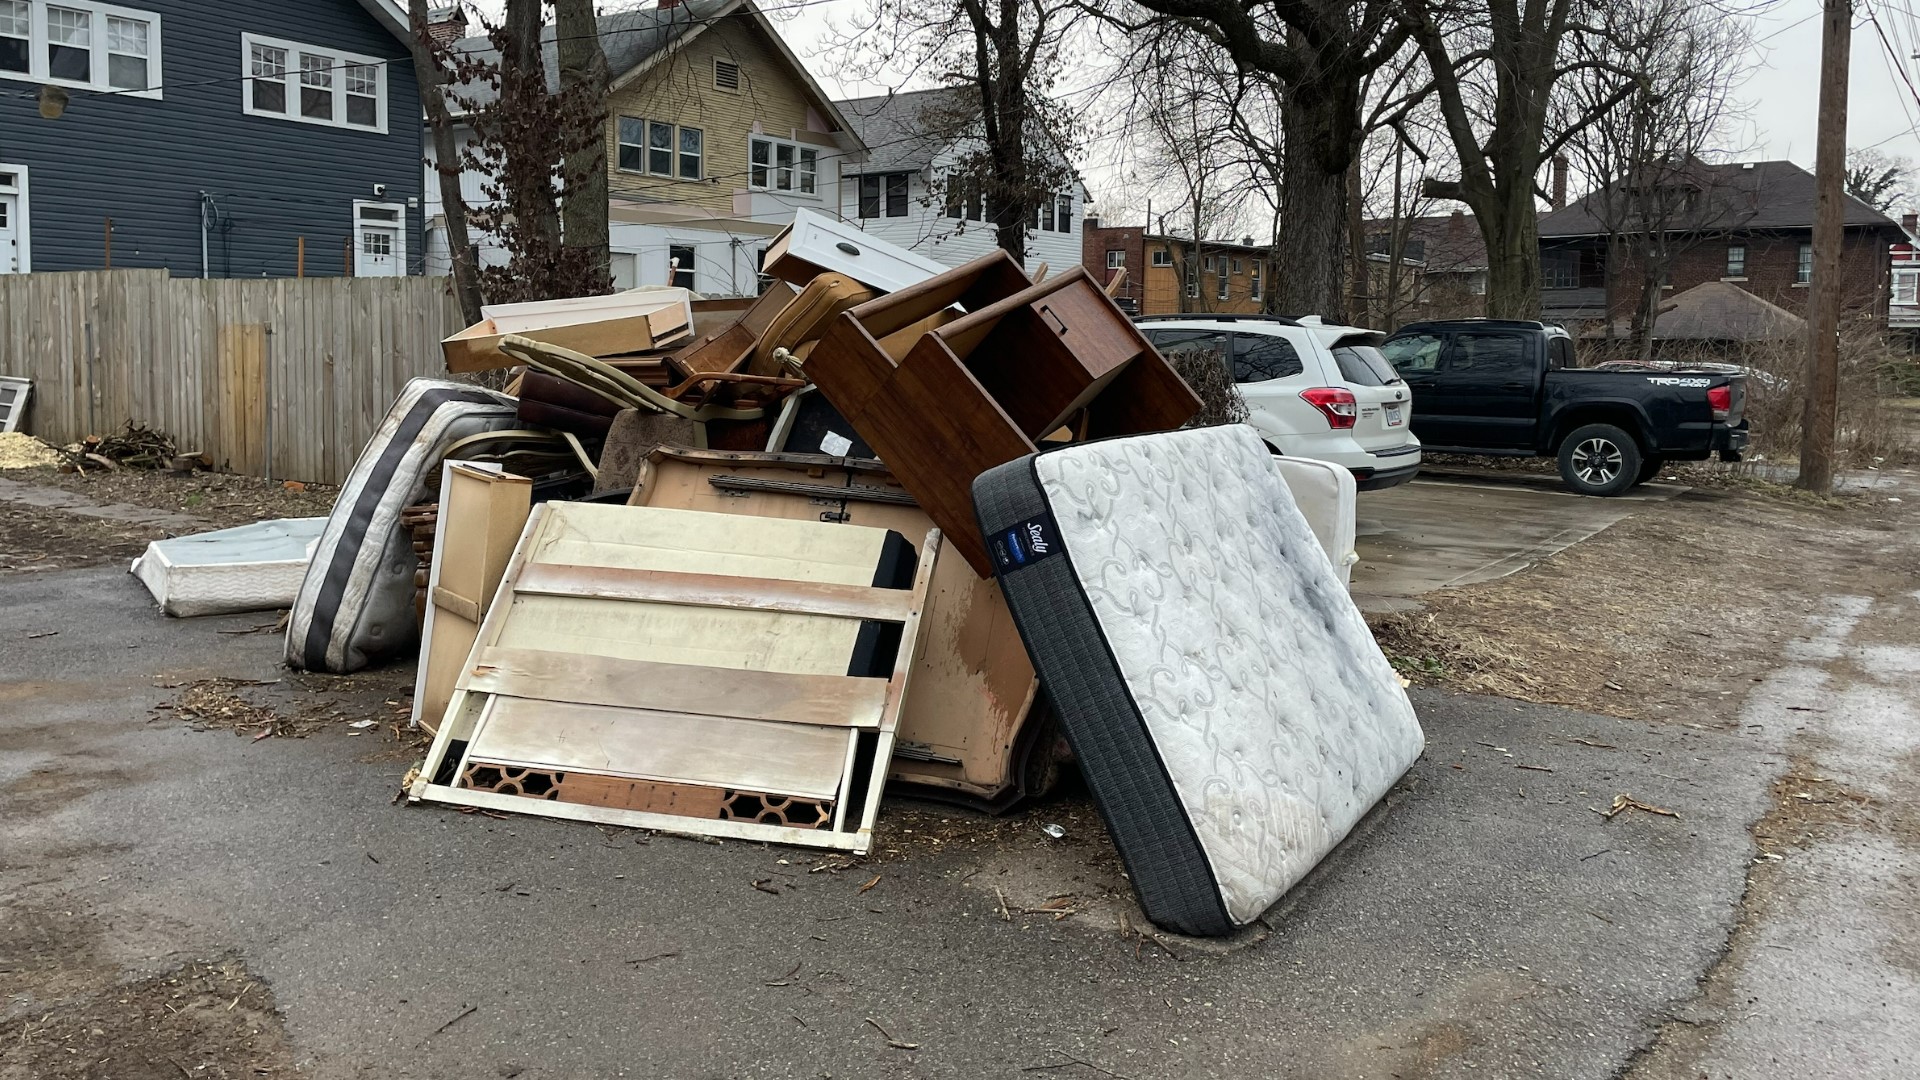 Residents say a dumping pile has been building up behind a property on Oak Street for nearly two months.